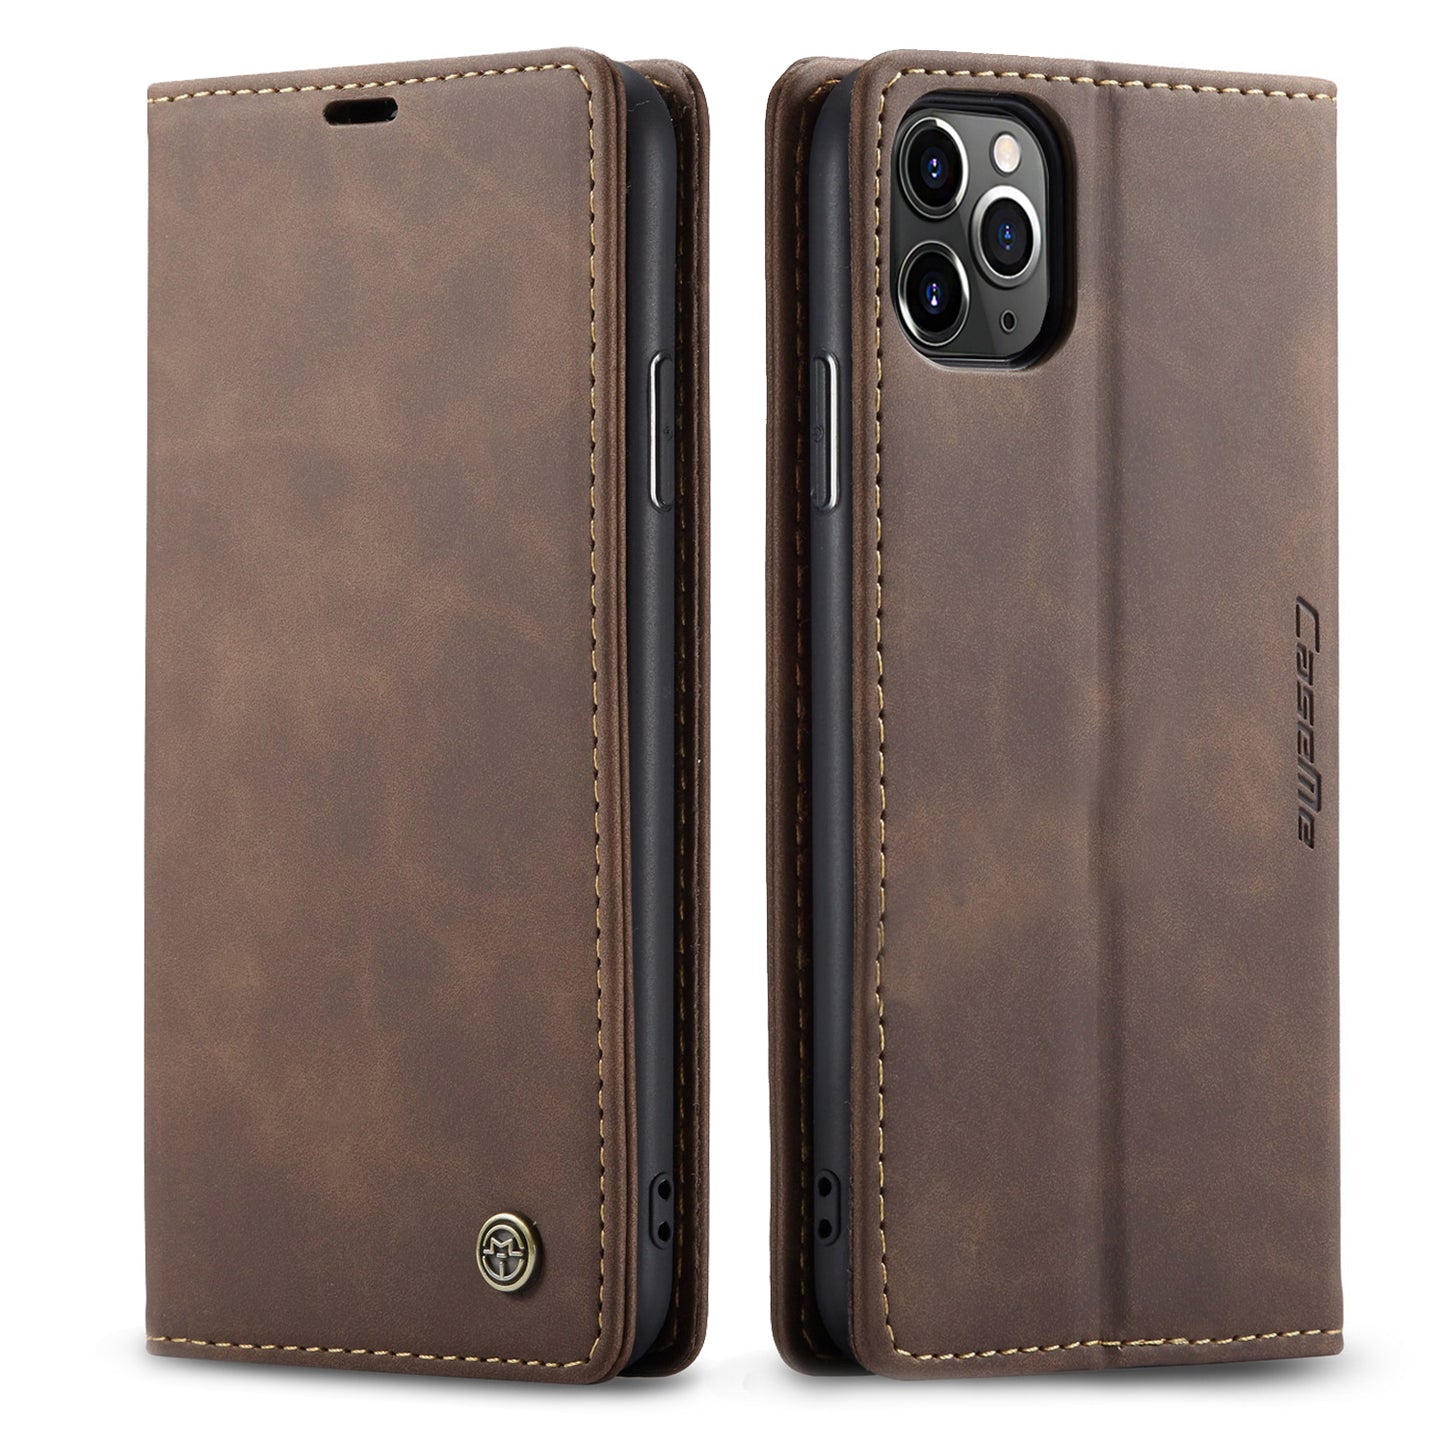 Book Classical iPhone 11 Pro Leather Case Retro Slim Wallet Stand